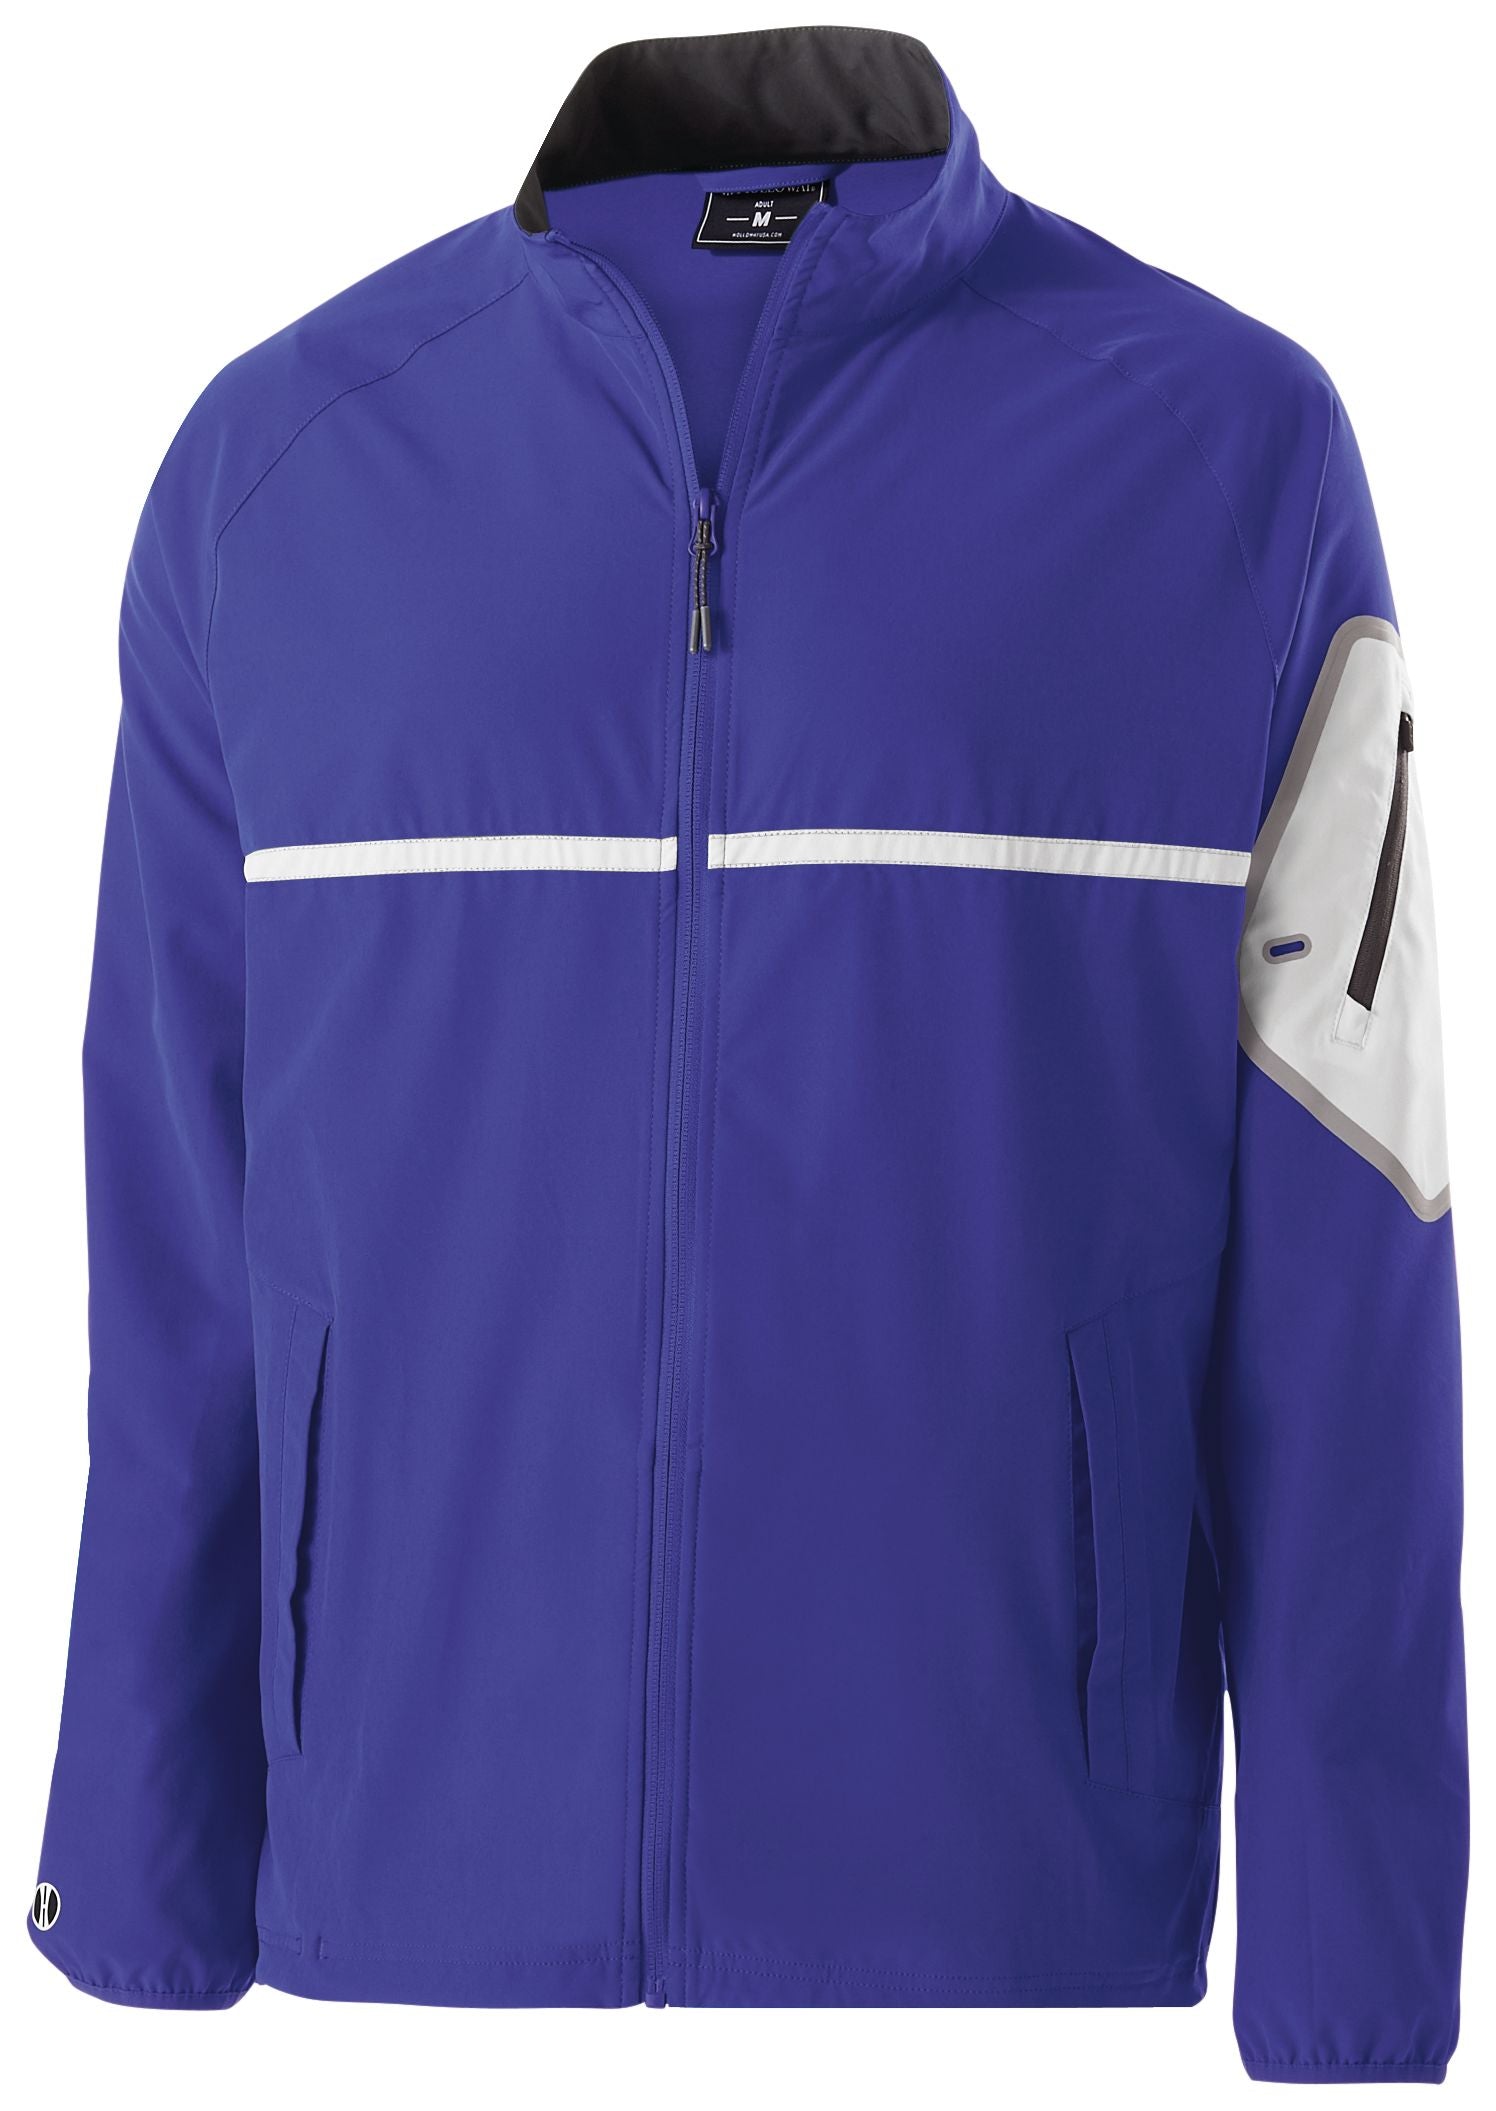 Holloway Weld Jacket in Purple/White  -Part of the Adult, Adult-Jacket, Holloway, Outerwear, Weld-Collection product lines at KanaleyCreations.com